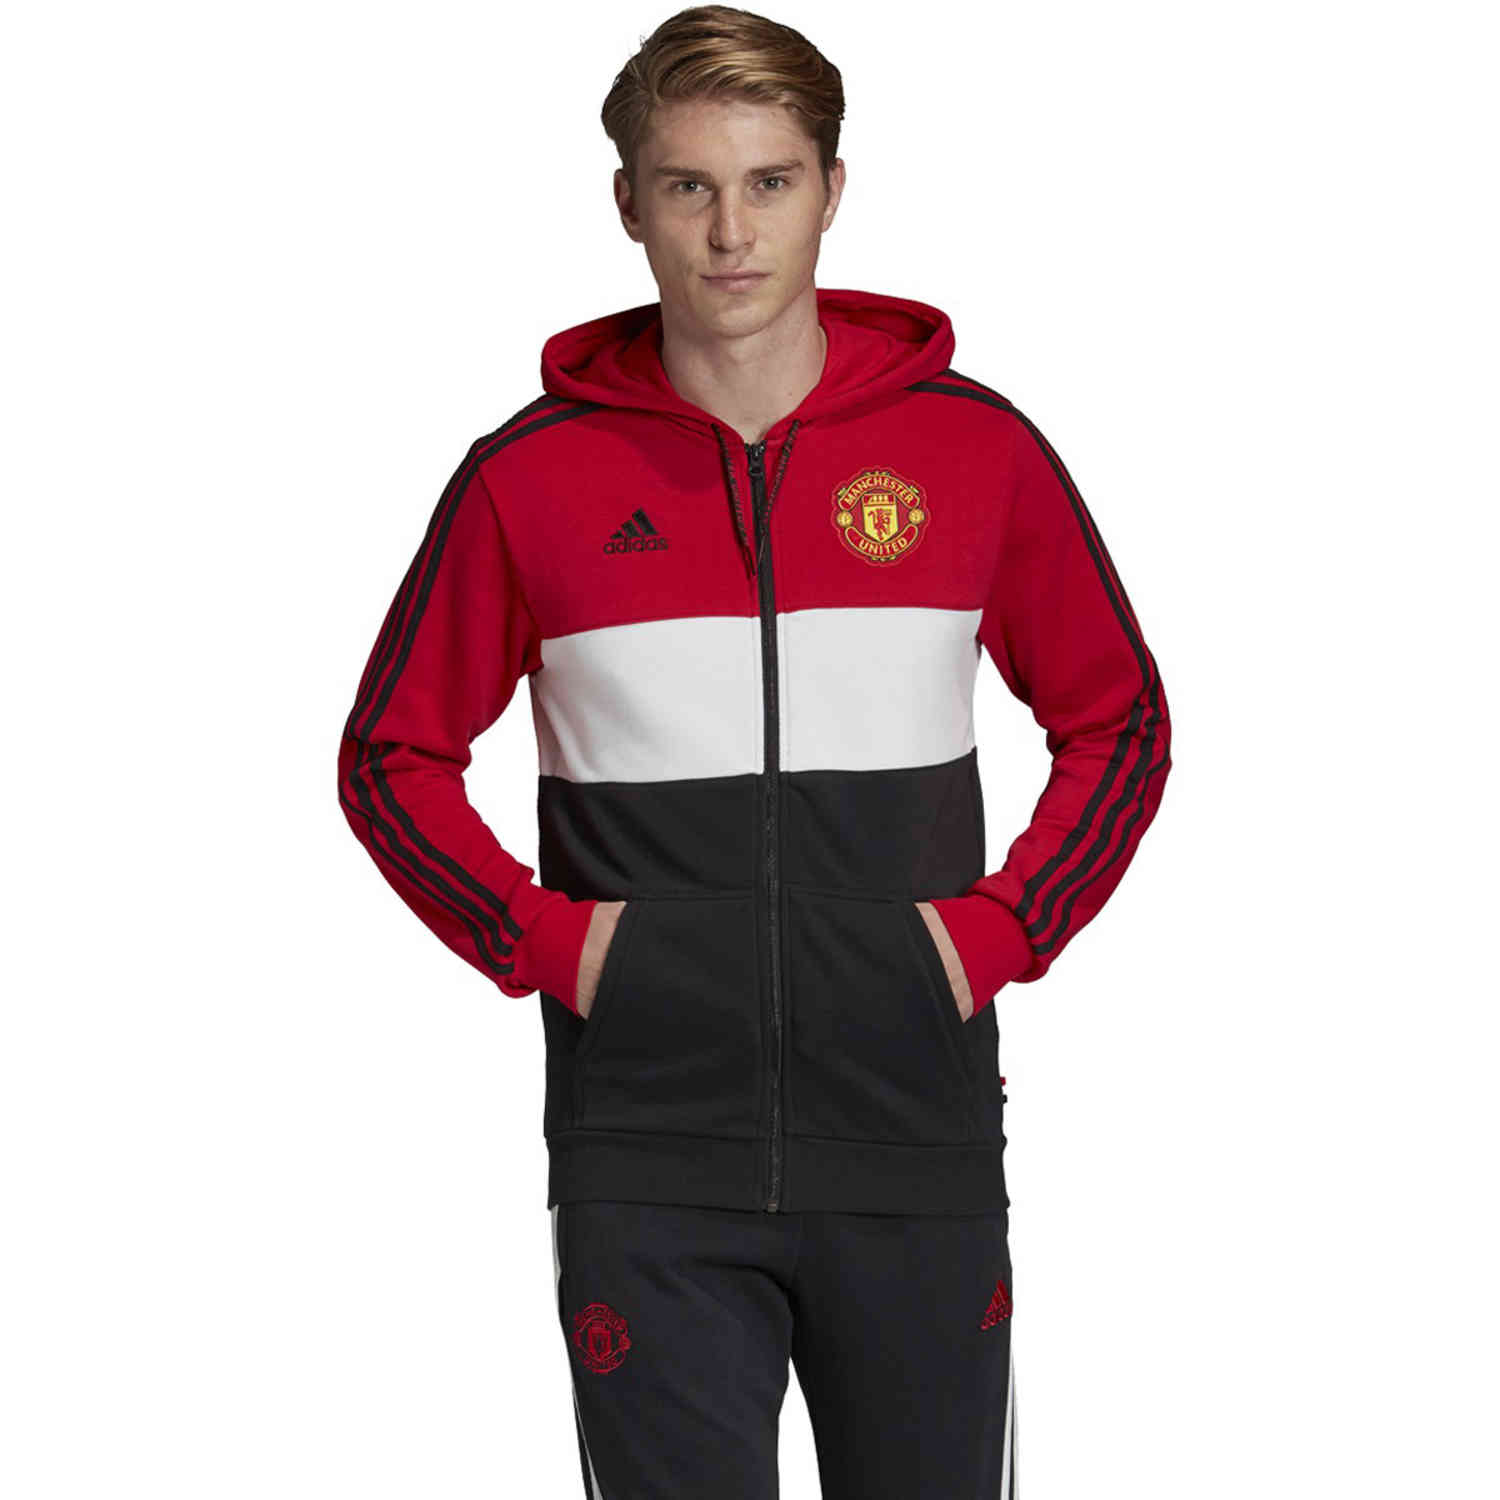 Encyclopedia exception Pronoun adidas Manchester United Full Zip Hoodie - Real Red/White/Black - SoccerPro